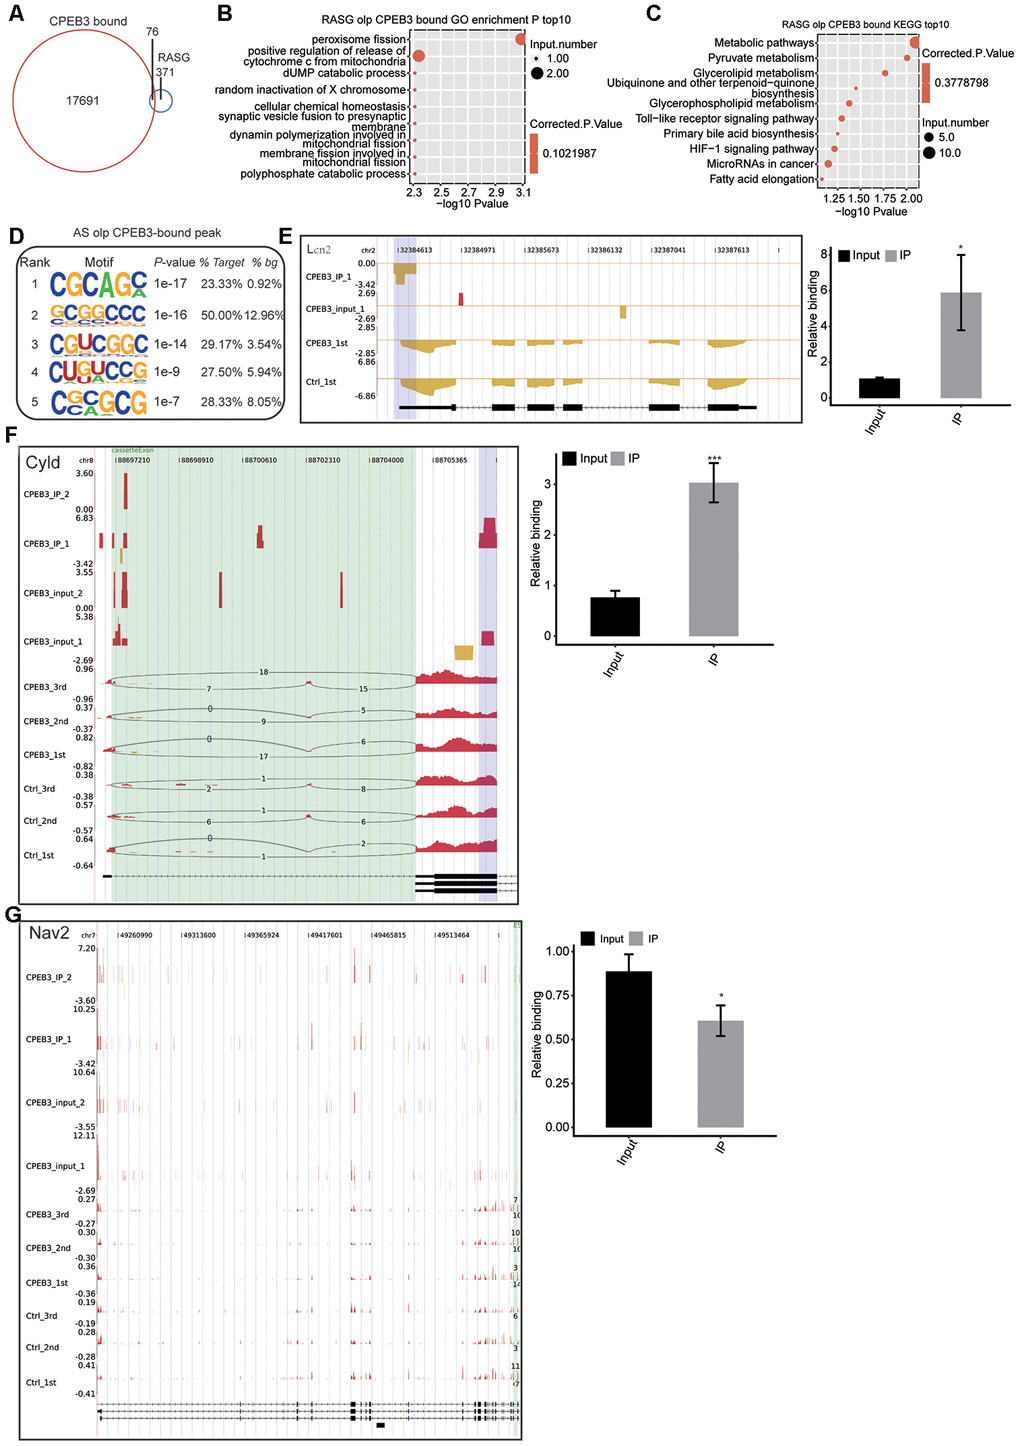 Integrated analysis of CPEB3-bound genes and the regulated alternative splicing events (RASE) in response to CPEB3 overexpression. (A) The overlap of CPEB3-bound peaks with CPEB3-regulated alternative splicing events. (B)Top 10 GO biological process in which the overlapped genes in A were enriched. (C) Top 10 KEGG pathways in which the overlapped genes in A were enriched. (D) The CG motifs over-represented in CPEB3 peaks overlapped with RASEs. The motifs were searched by running HOMER pipeline. (E–G) The reads density landscape of CPEB3-binding peaks on DEGs and RASEs (left). RIP-qPCR validation of the CPEB3 binding a peak was showed (right). The asterisk (*) indicates *P 